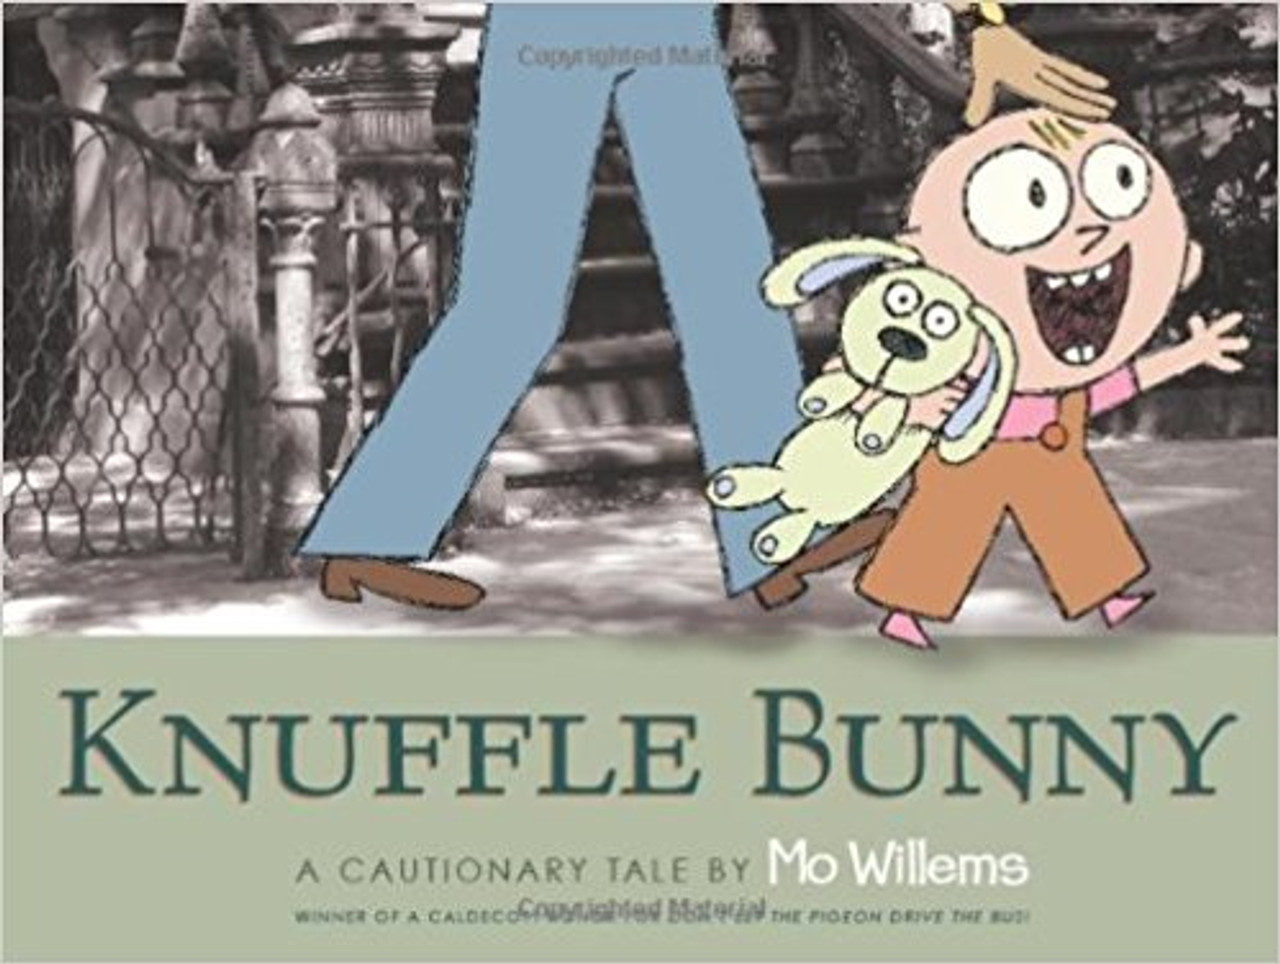 Knuffle Bunny A Cautionary Tale (Hard Cover) by Mo Willems